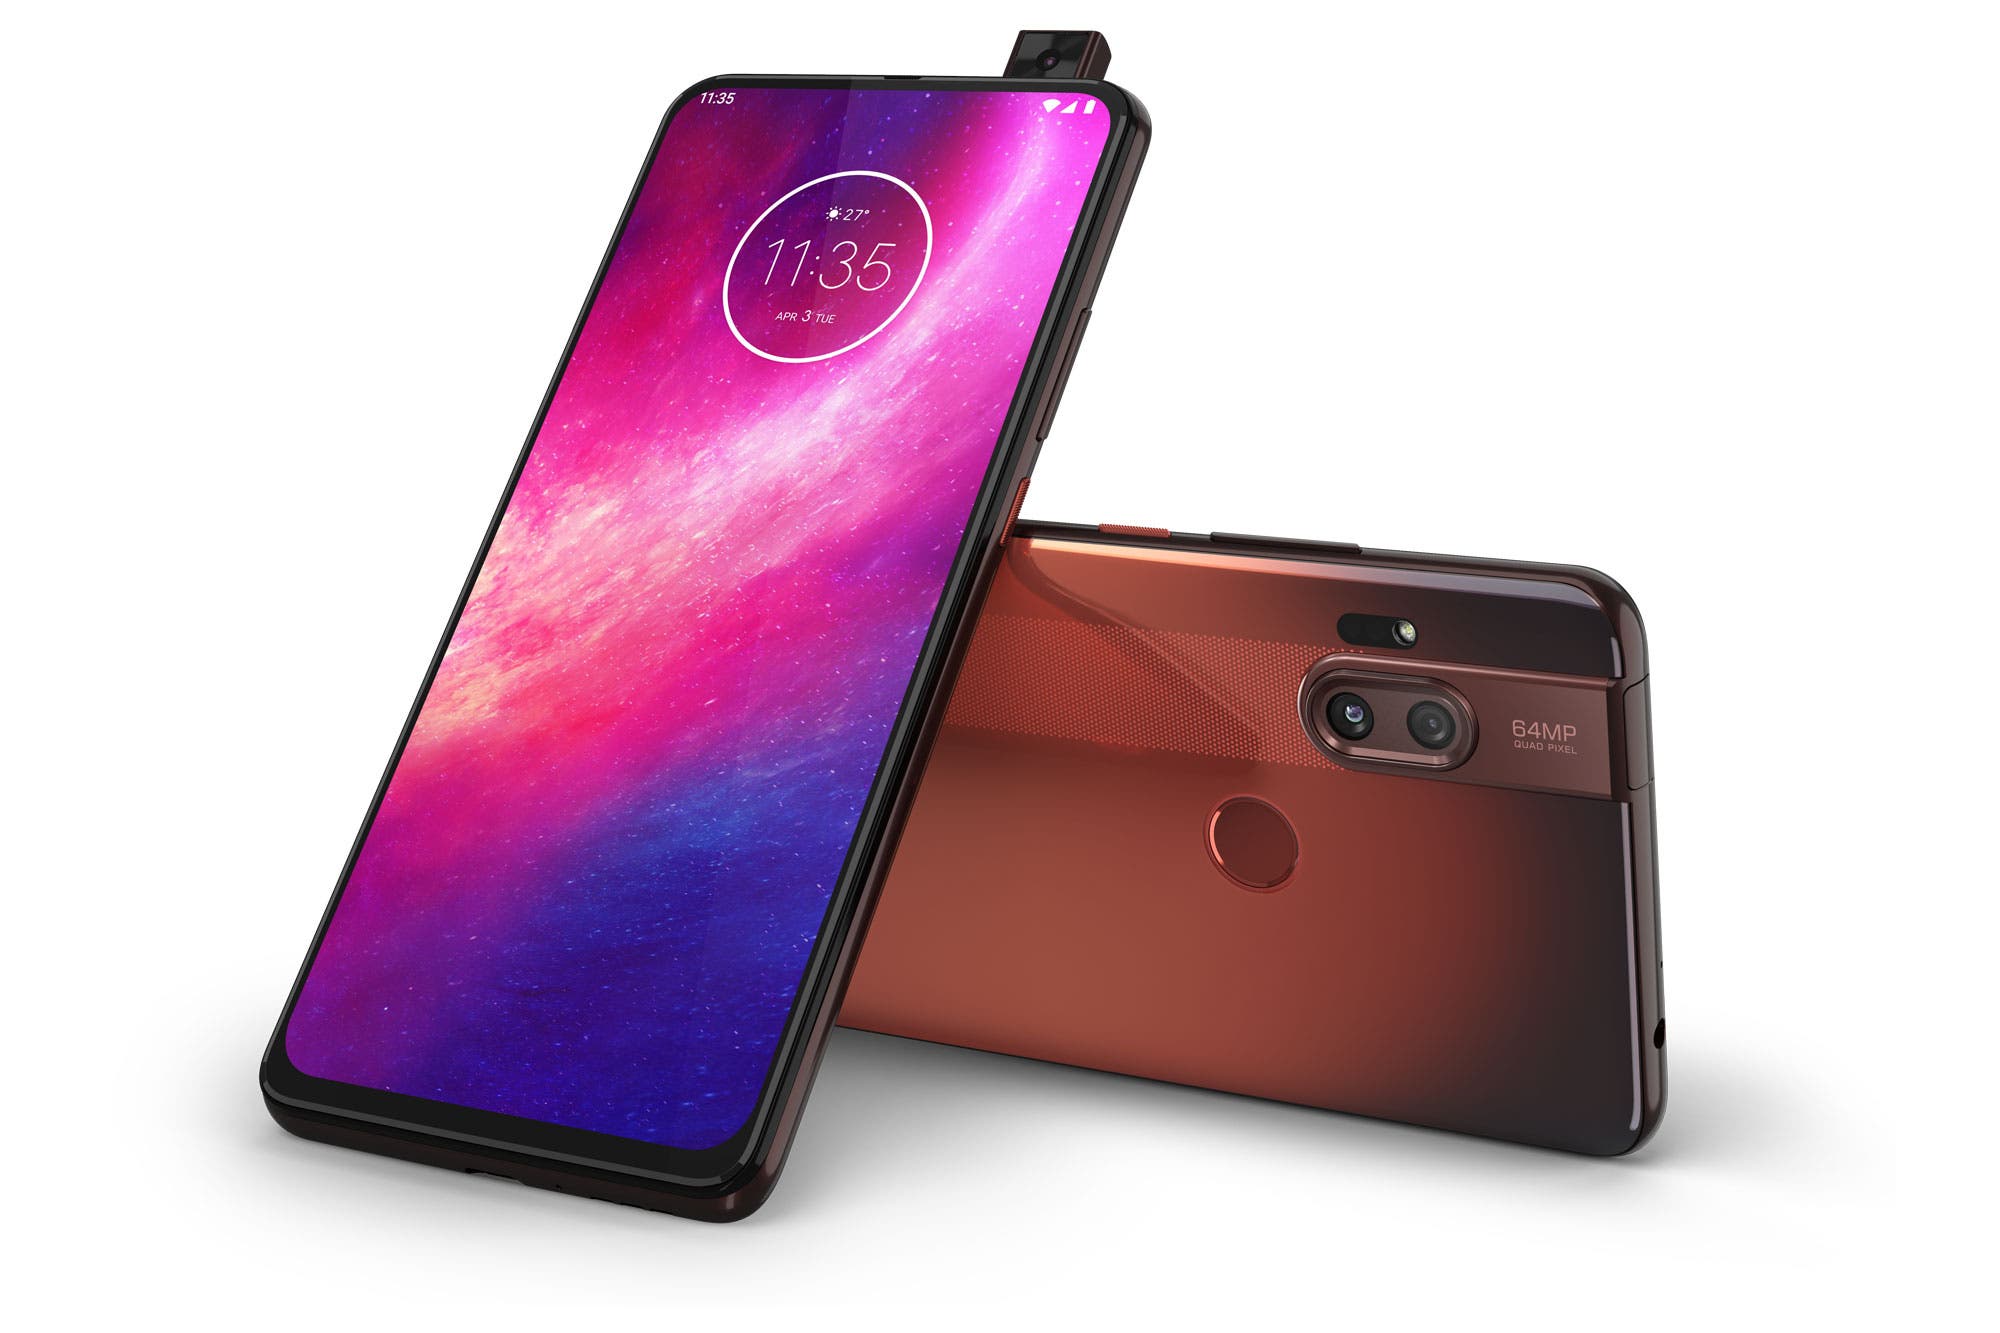 One Hyper: Motorola presented its phone with a retractable front camera and a 64 megapixel rear camera